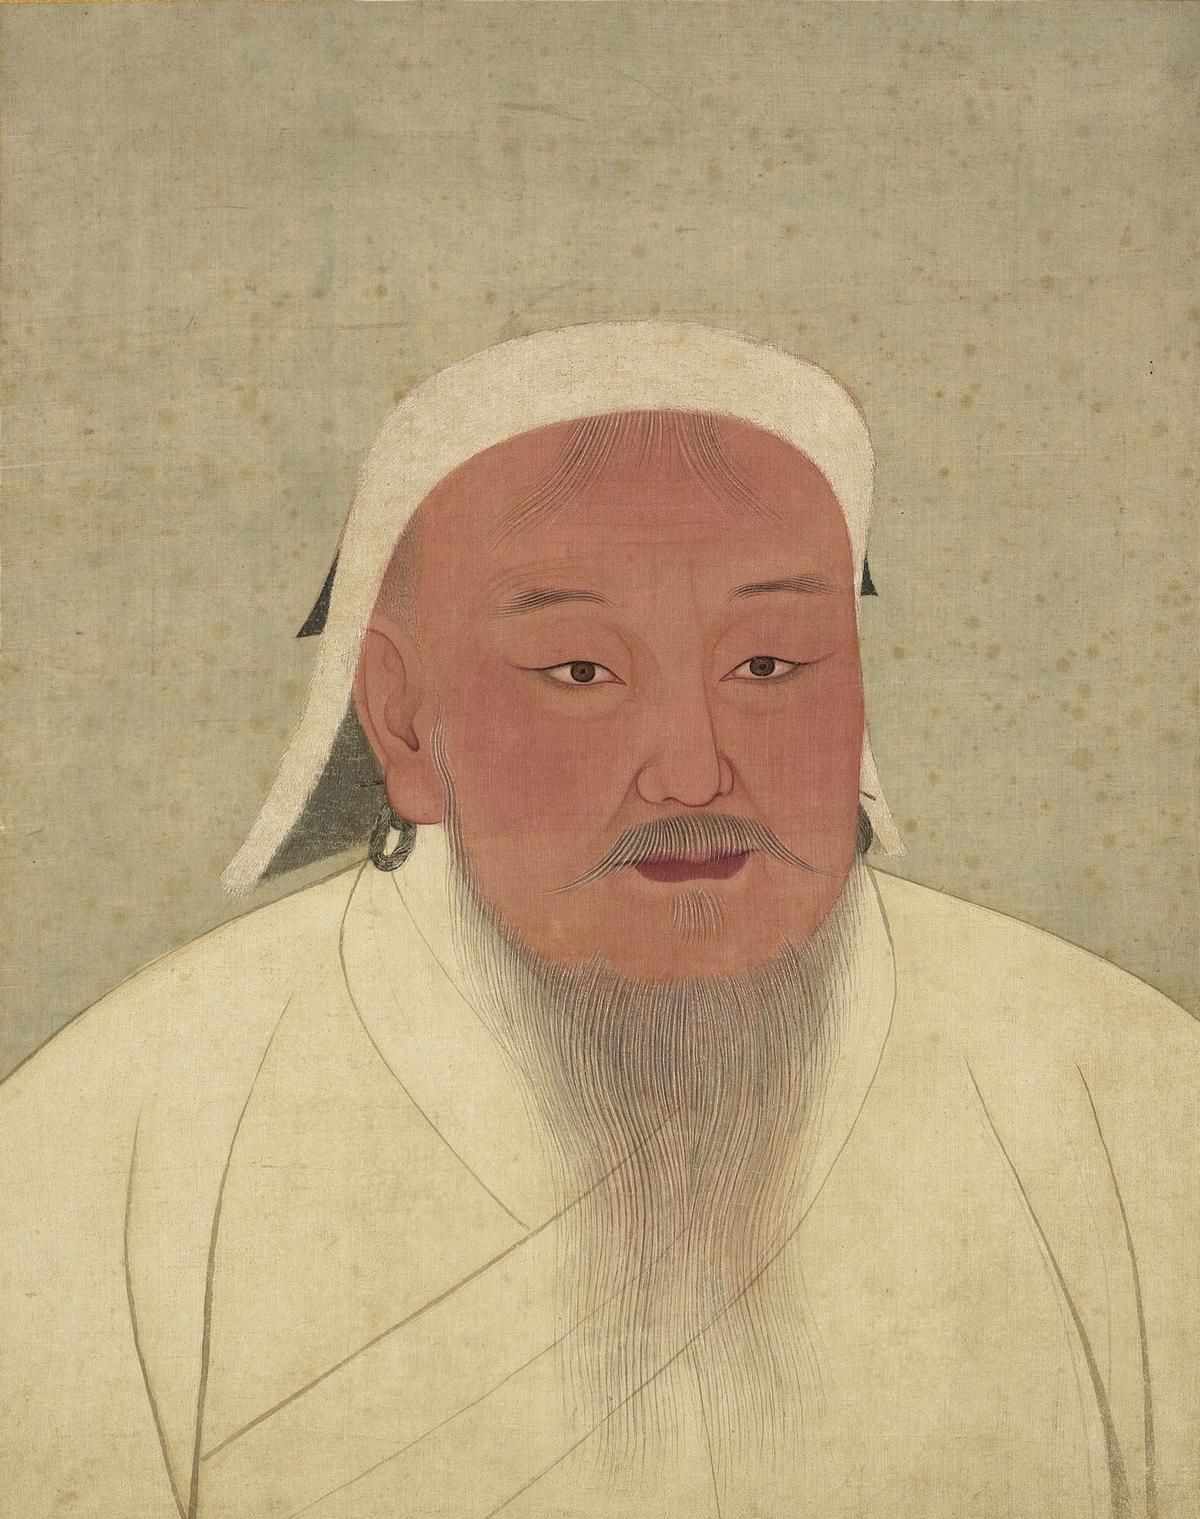 Paint and ink on silk portrait of Genghis Khan located in the National Palace Museum in Taipei, Taiwan (©Wikimedia Commons | <a href="https://commons.wikimedia.org/wiki/File:YuanEmperorAlbumGenghisPortrait.jpg">Dschingis Khan und seine Erben</a>)